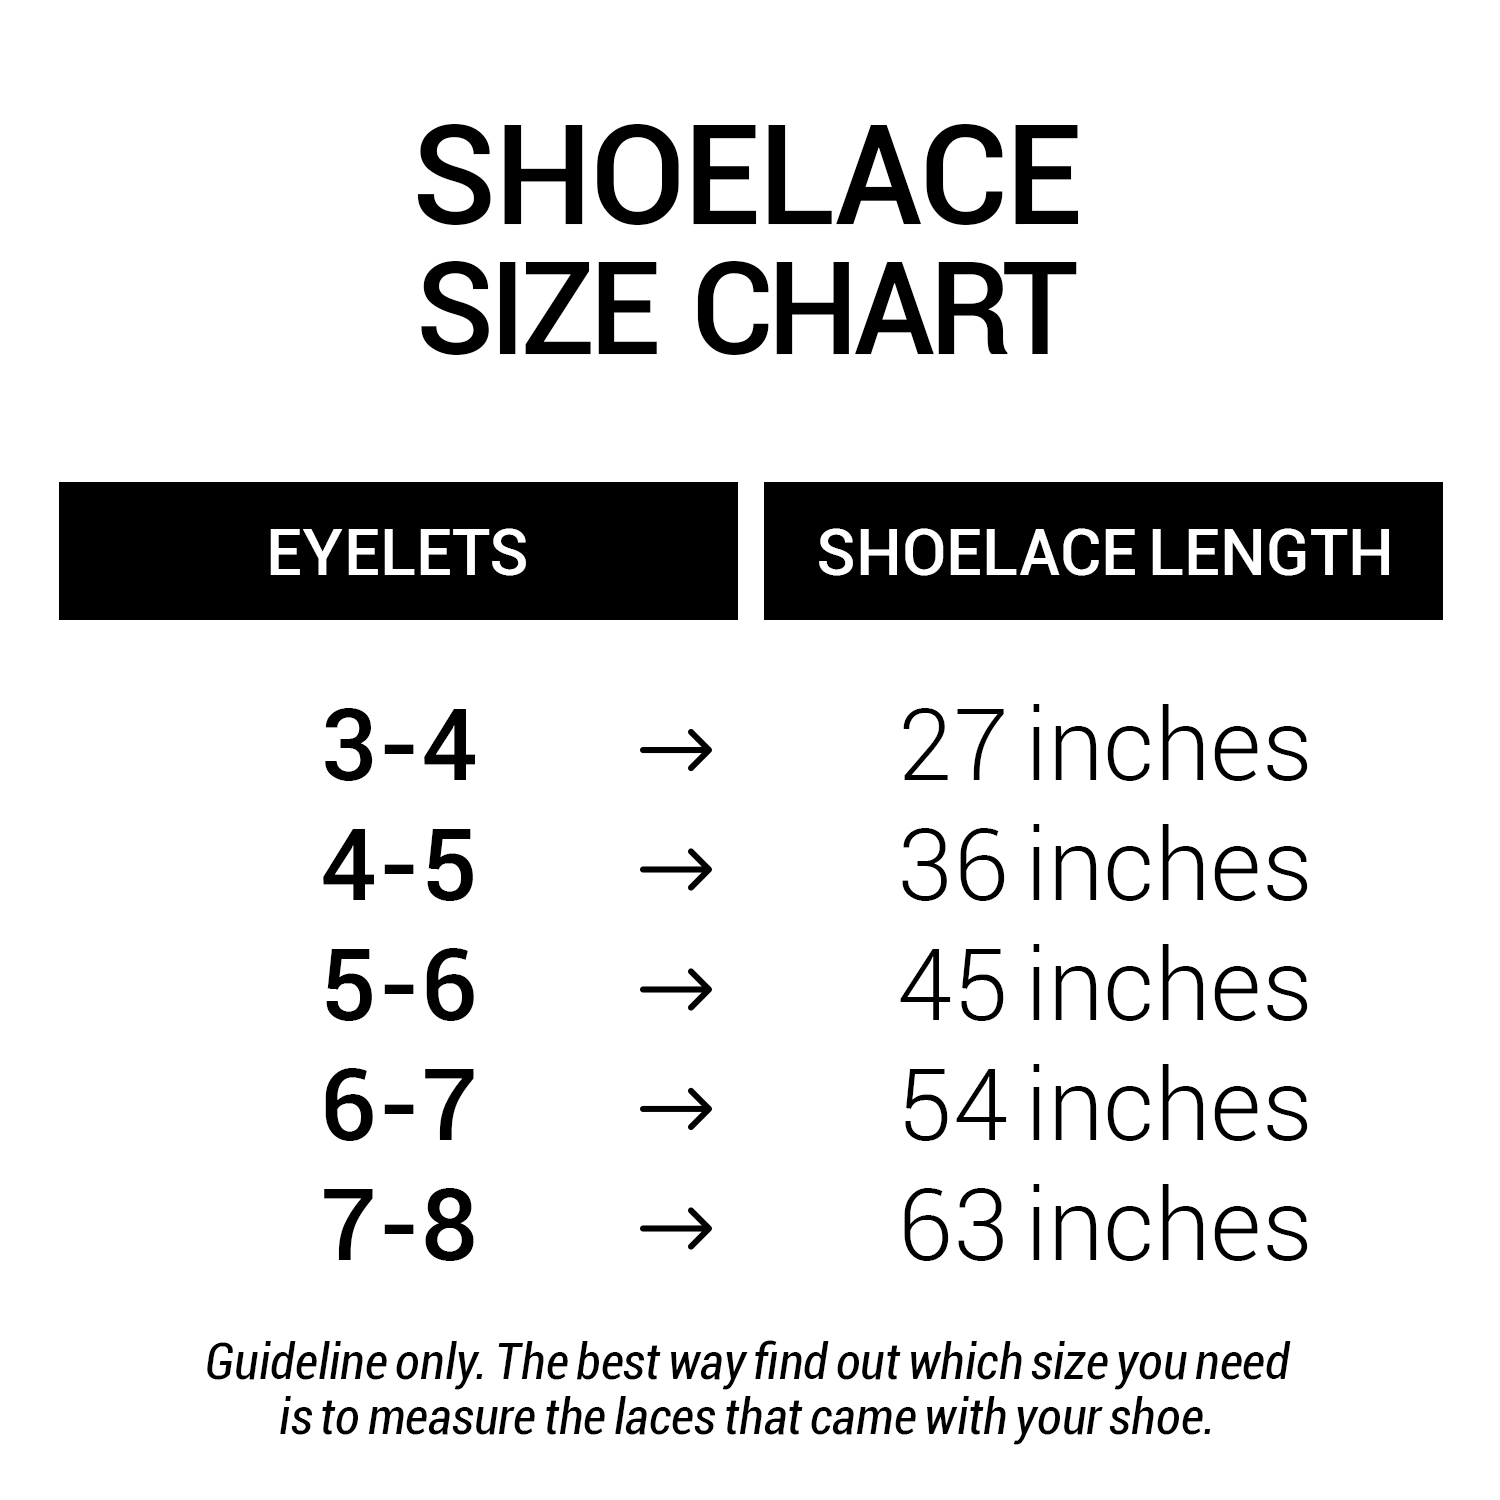 flat-round-oval-laces-size-chart-1